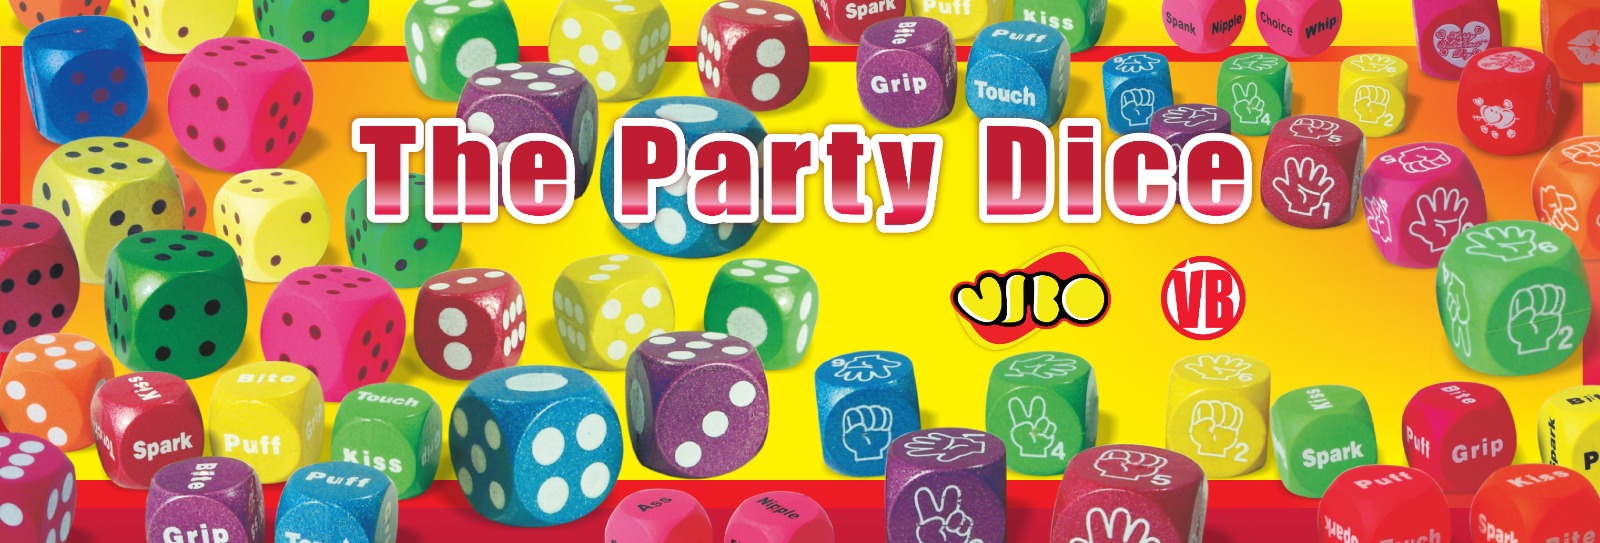 Party Dice